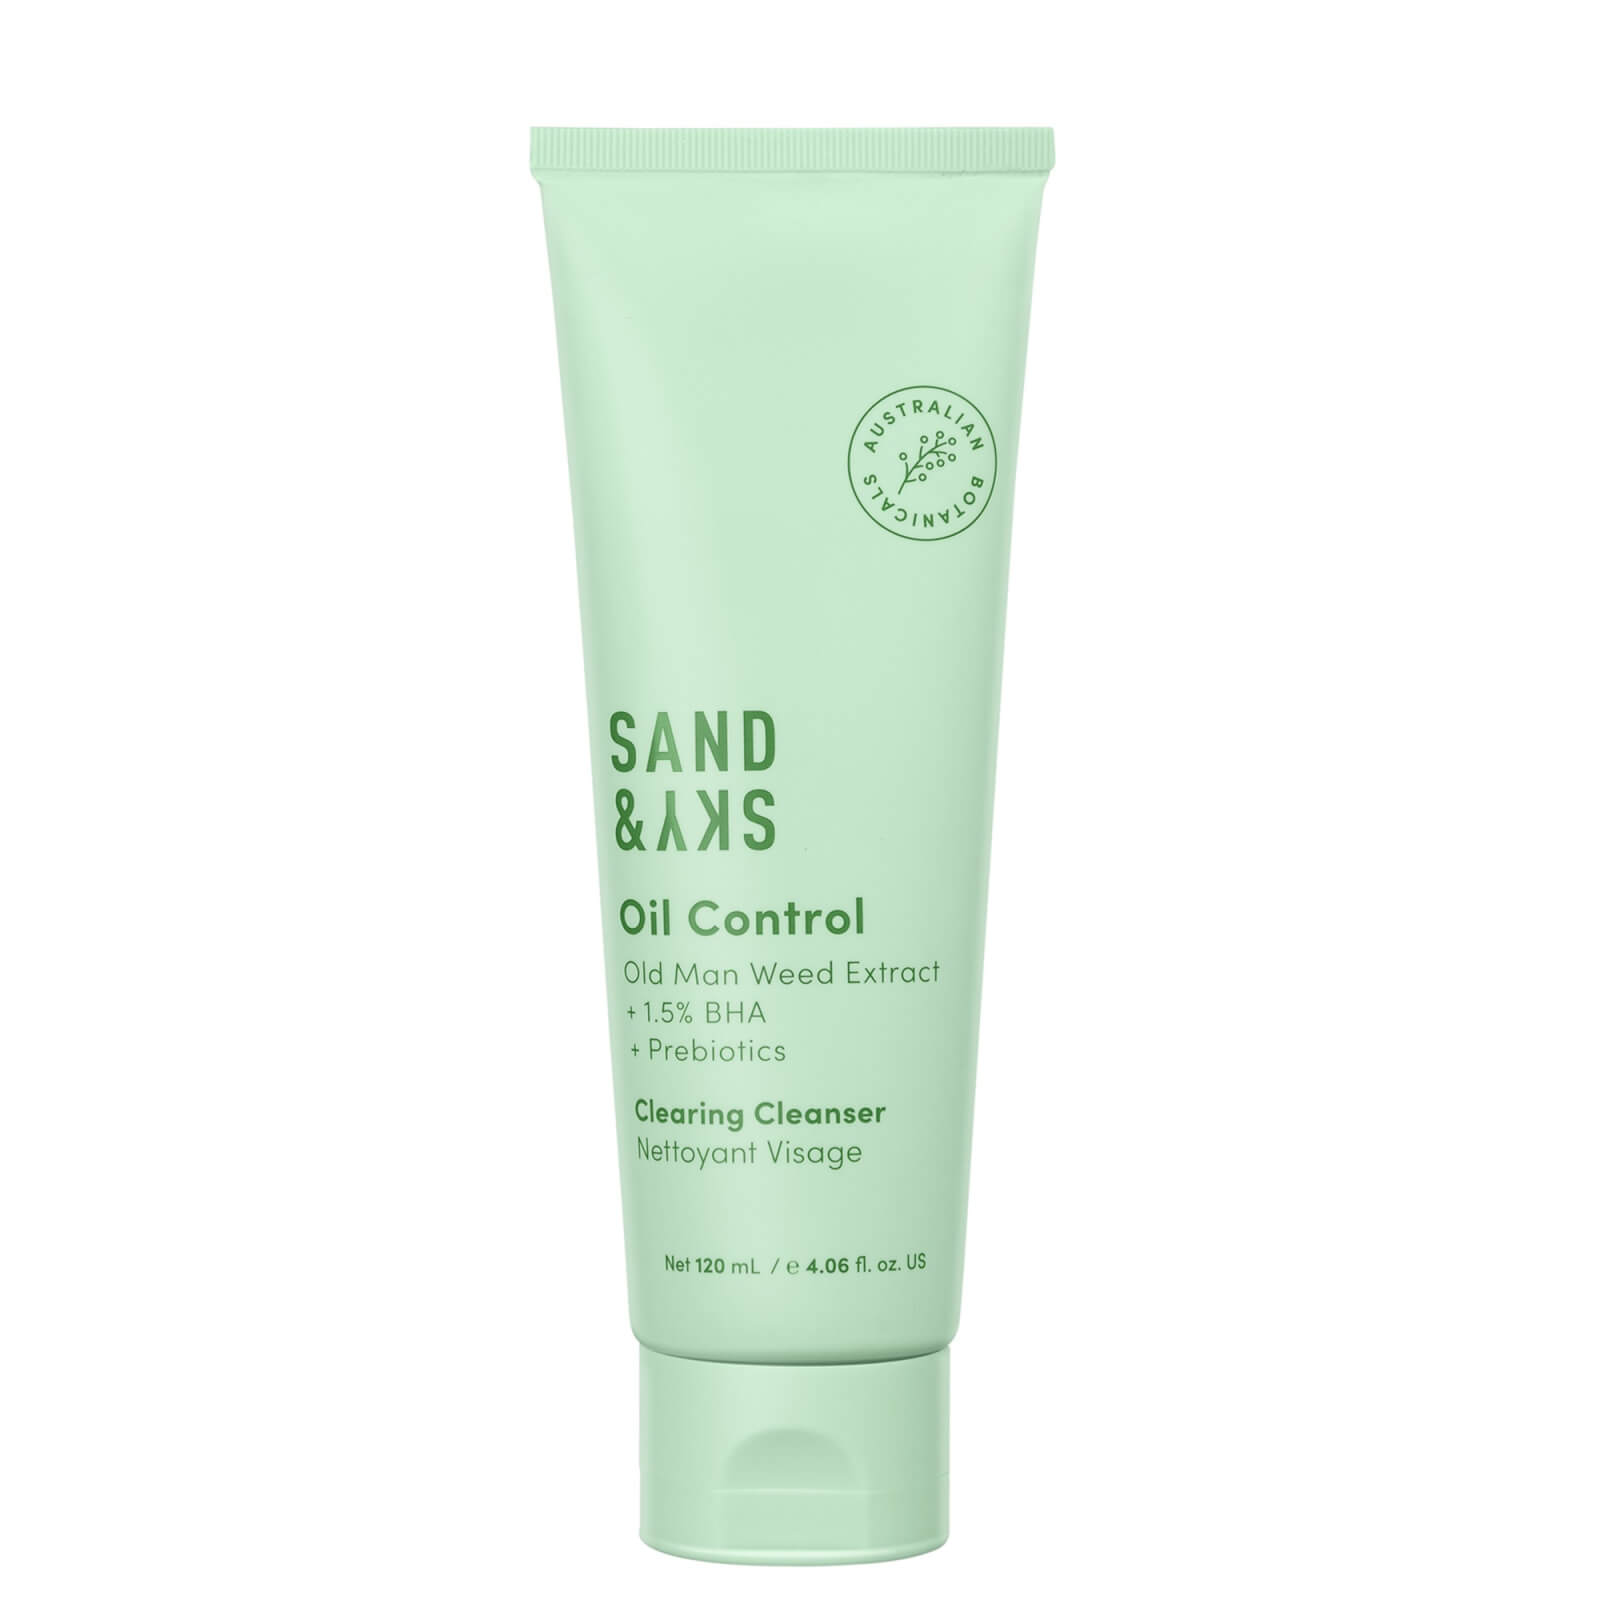 Photos - Facial / Body Cleansing Product Sand & Sky Oil Control Clearing Cleanser 120ml SS0001172020